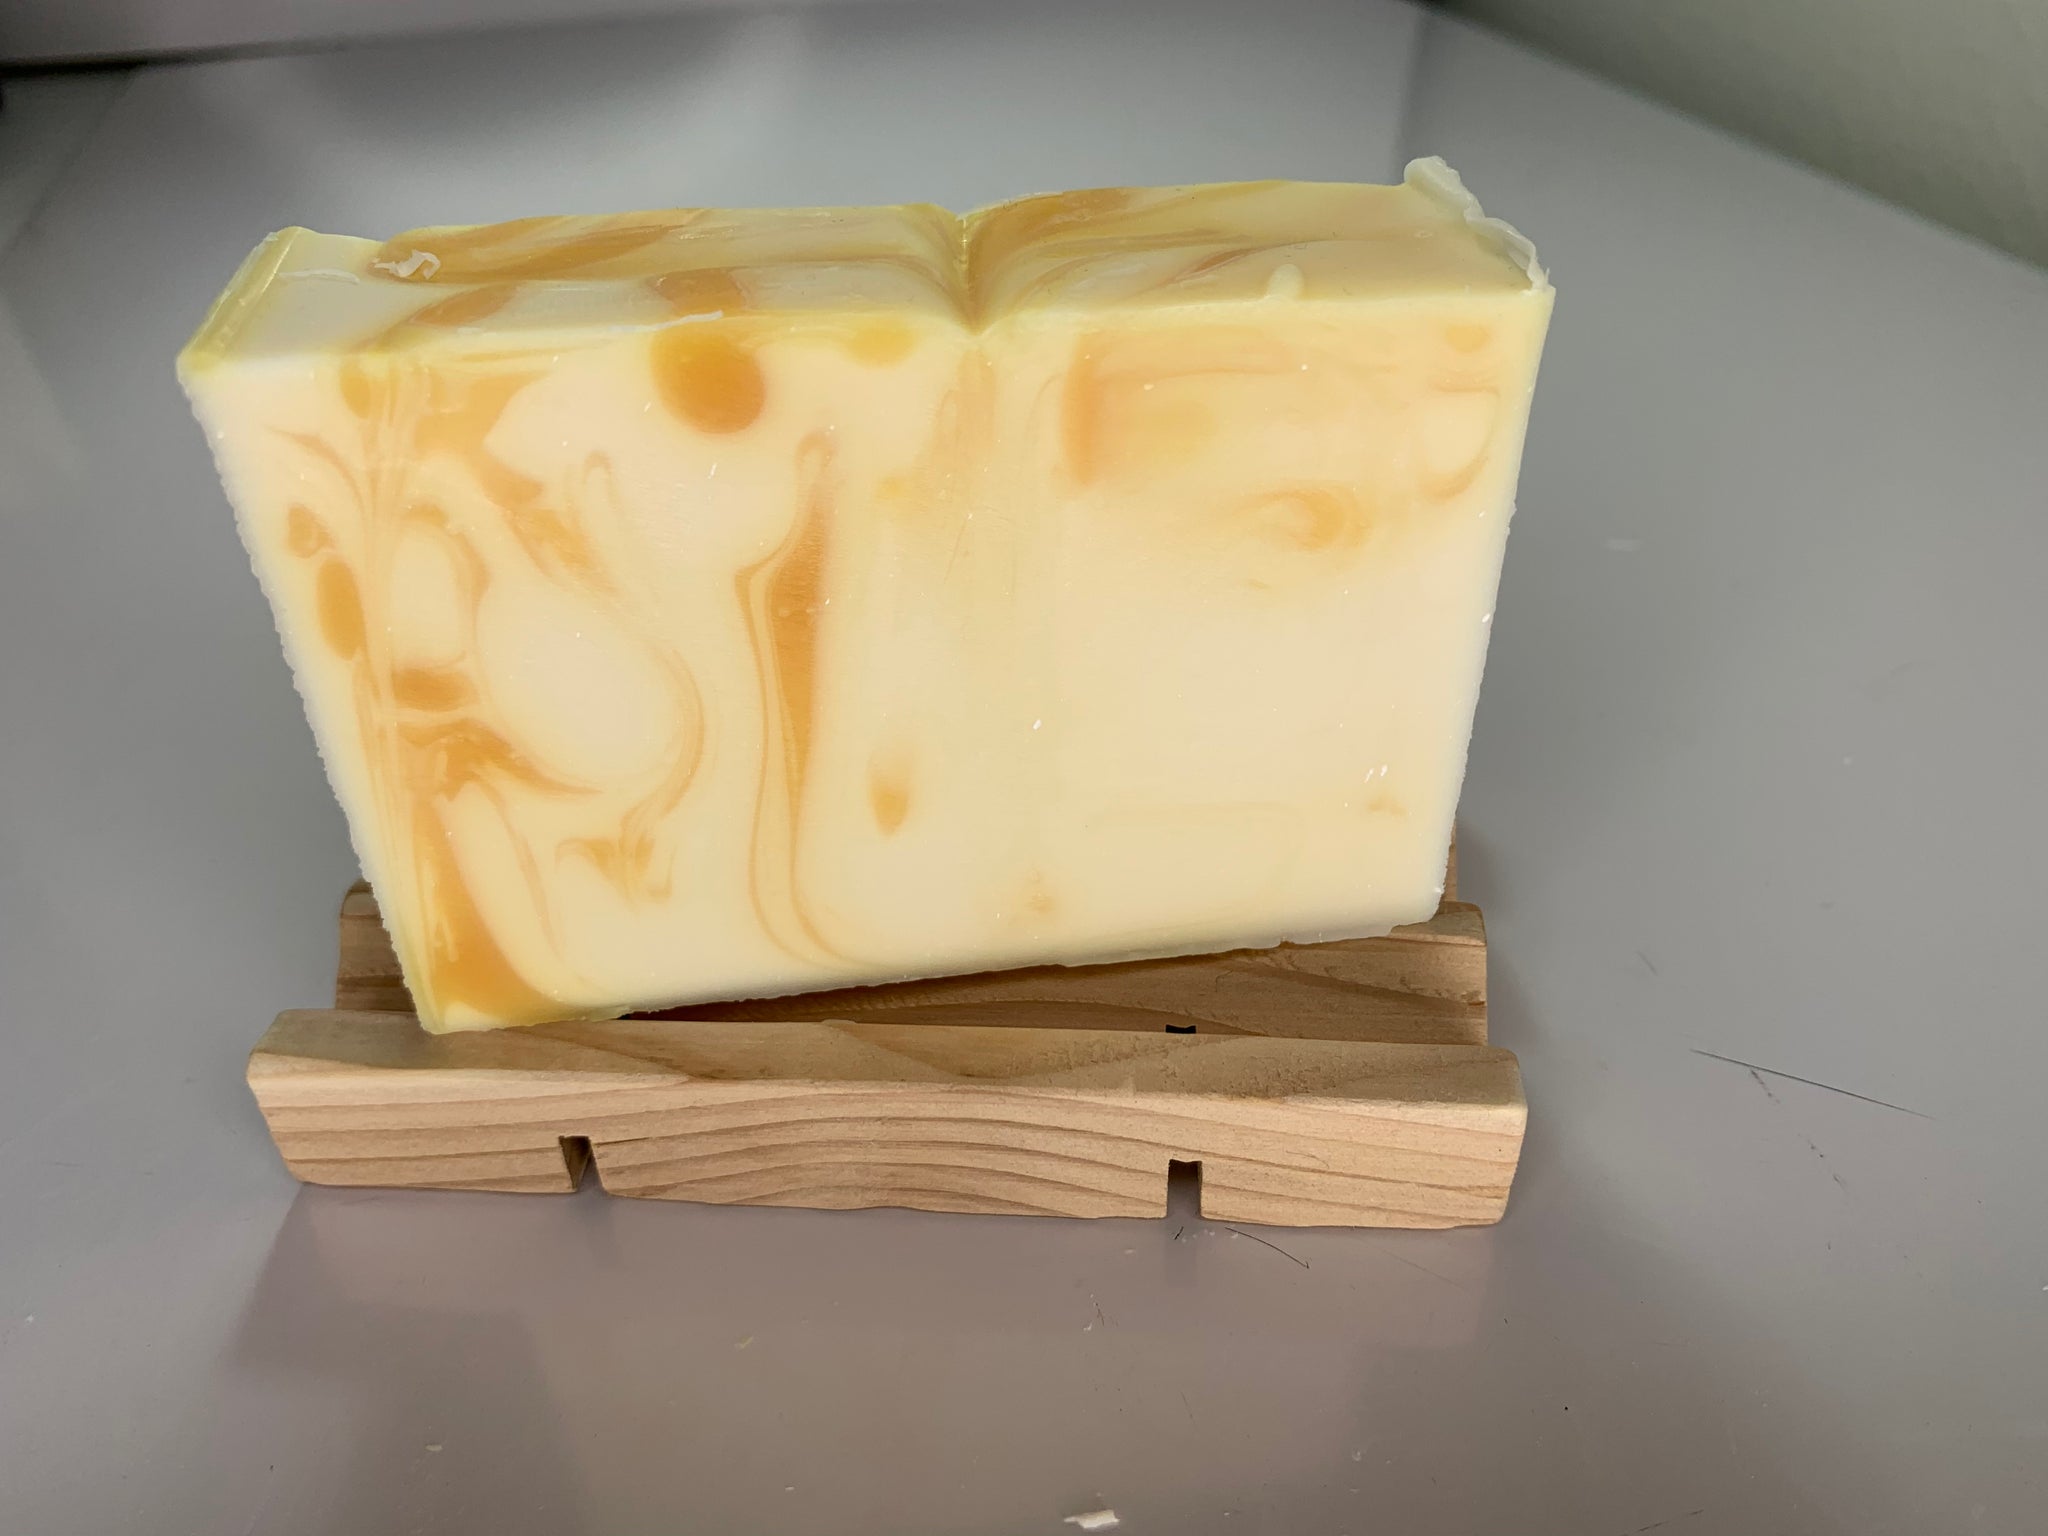 Cedar Soap Dish shown with a bar of our Citrus & Peppermint Organic Soap